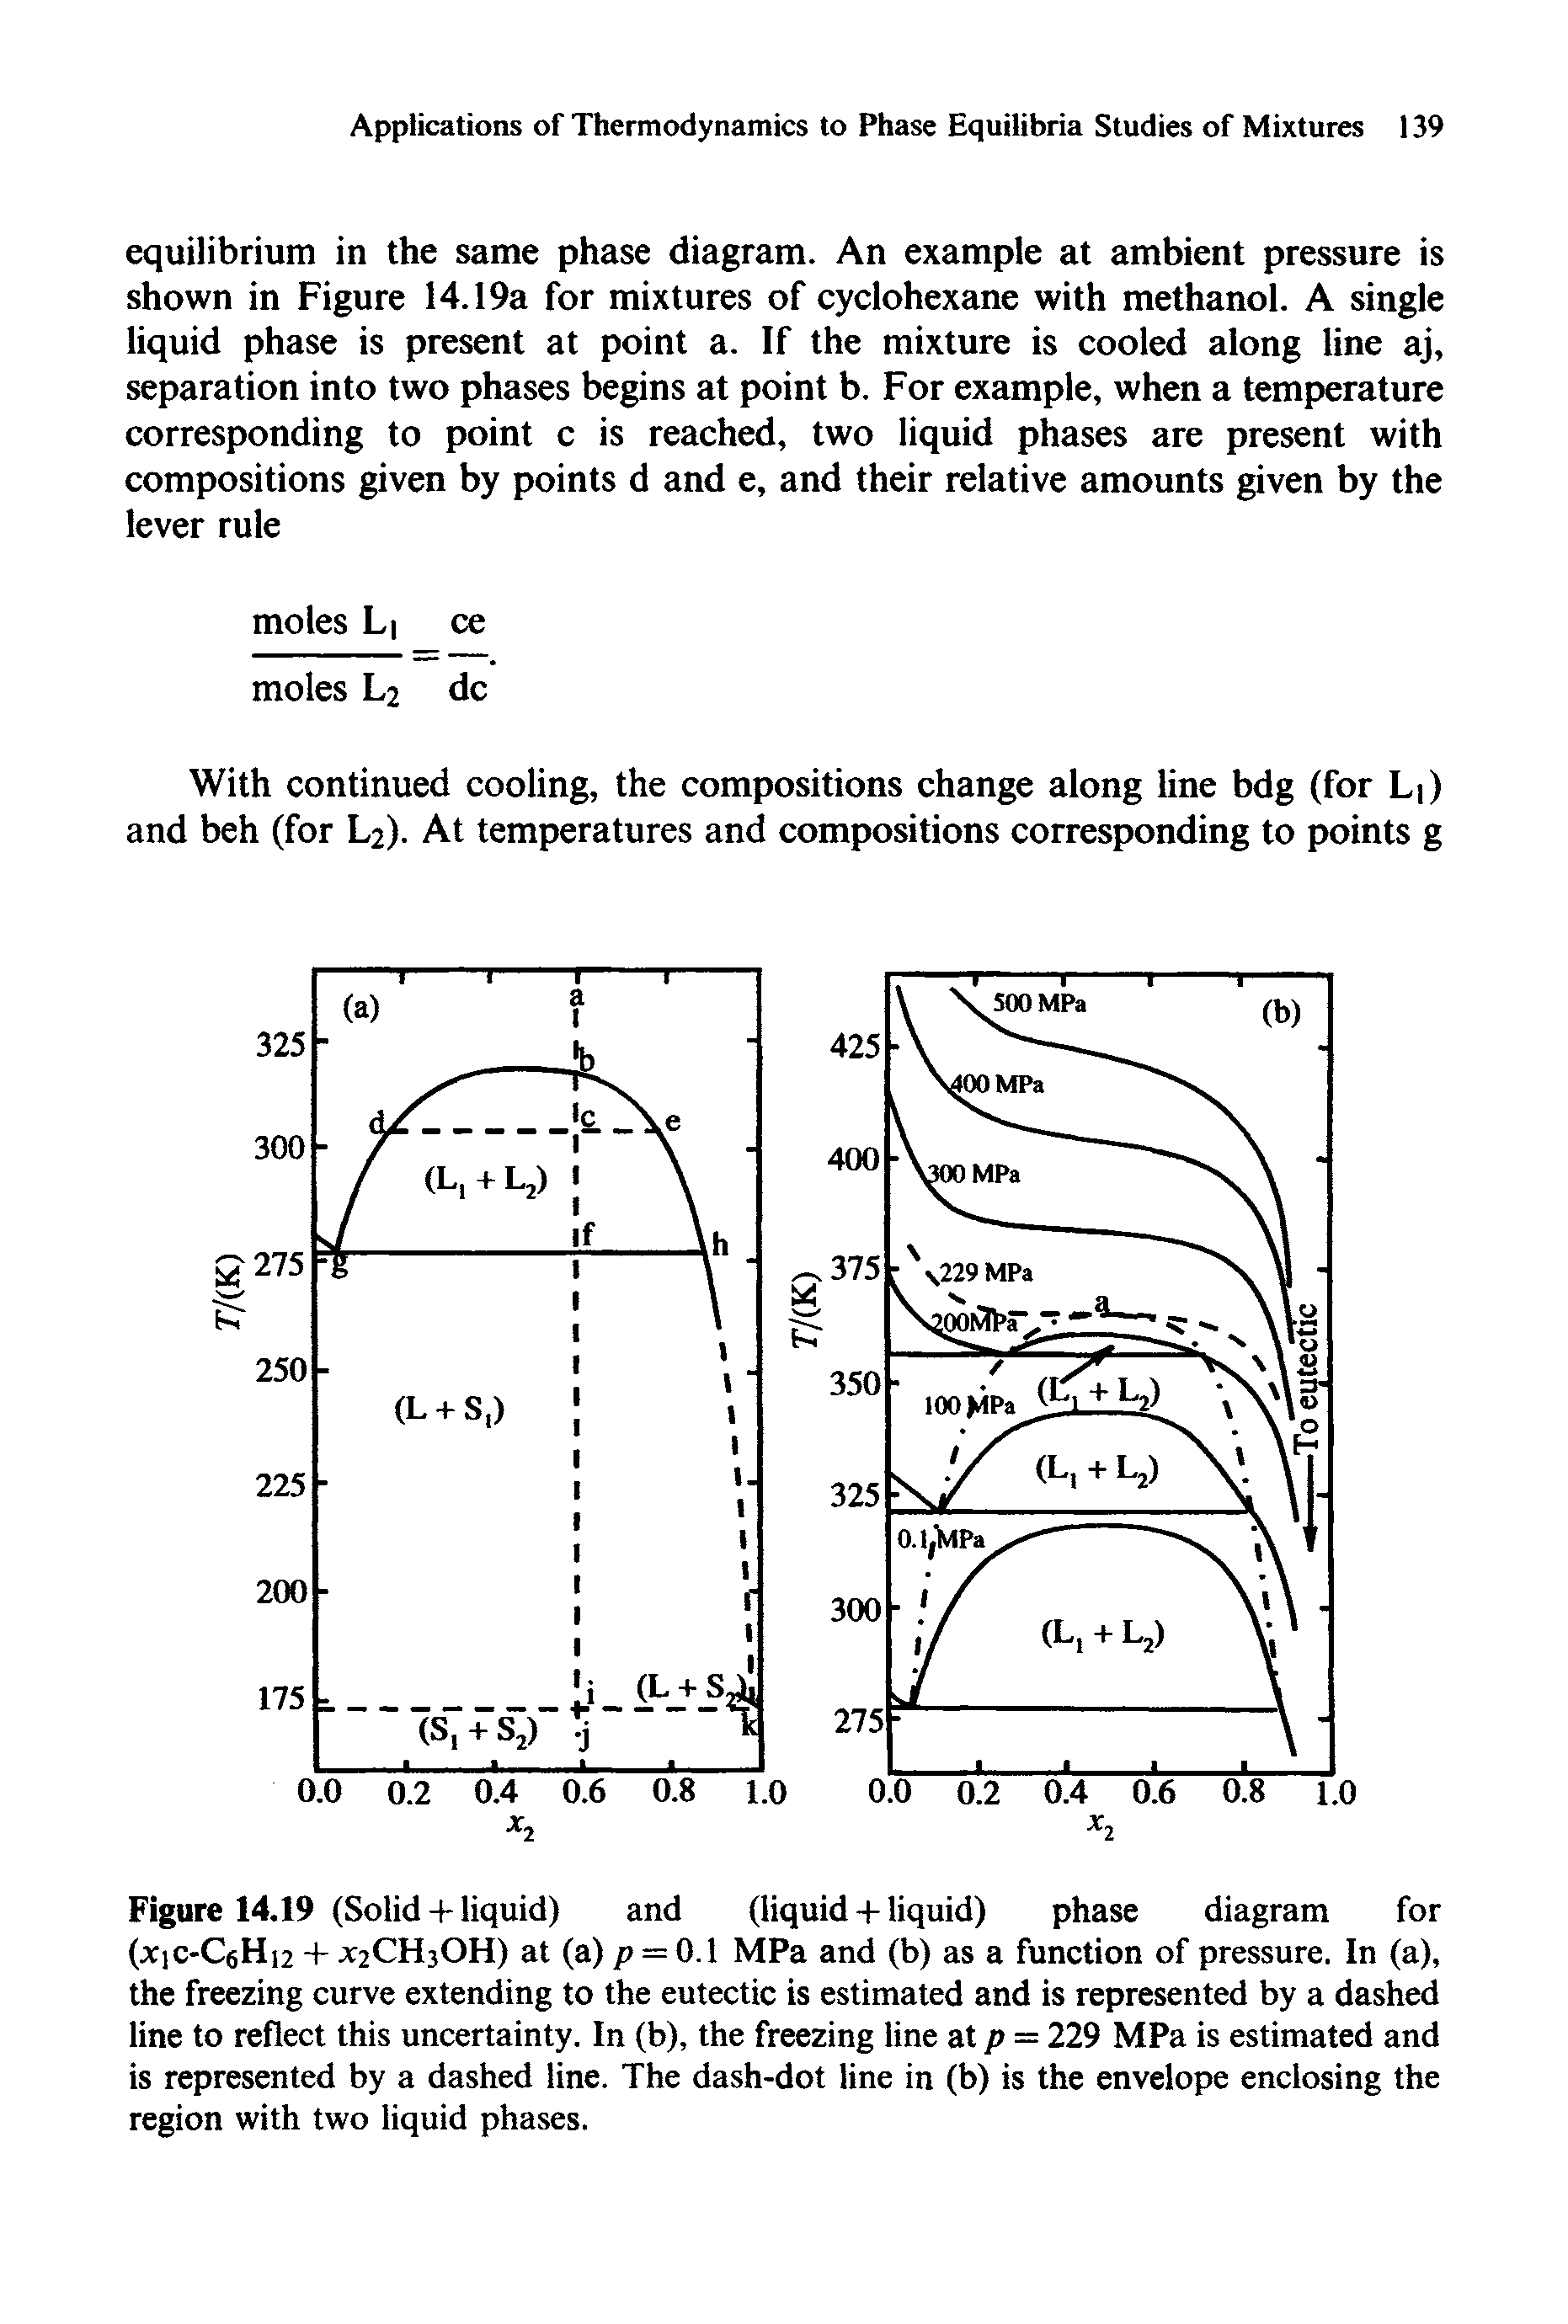 Figure 14.19 (Solid + liquid) and (liquid + liquid) phase diagram for (xic-C6H 12 + X2CH3OH) at (a) p = 0.1 MPa and (b) as a function of pressure. In (a), the freezing curve extending to the eutectic is estimated and is represented by a dashed line to reflect this uncertainty. In (b), the freezing line at p = 229 MPa is estimated and is represented by a dashed line. The dash-dot line in (b) is the envelope enclosing the region with two liquid phases.